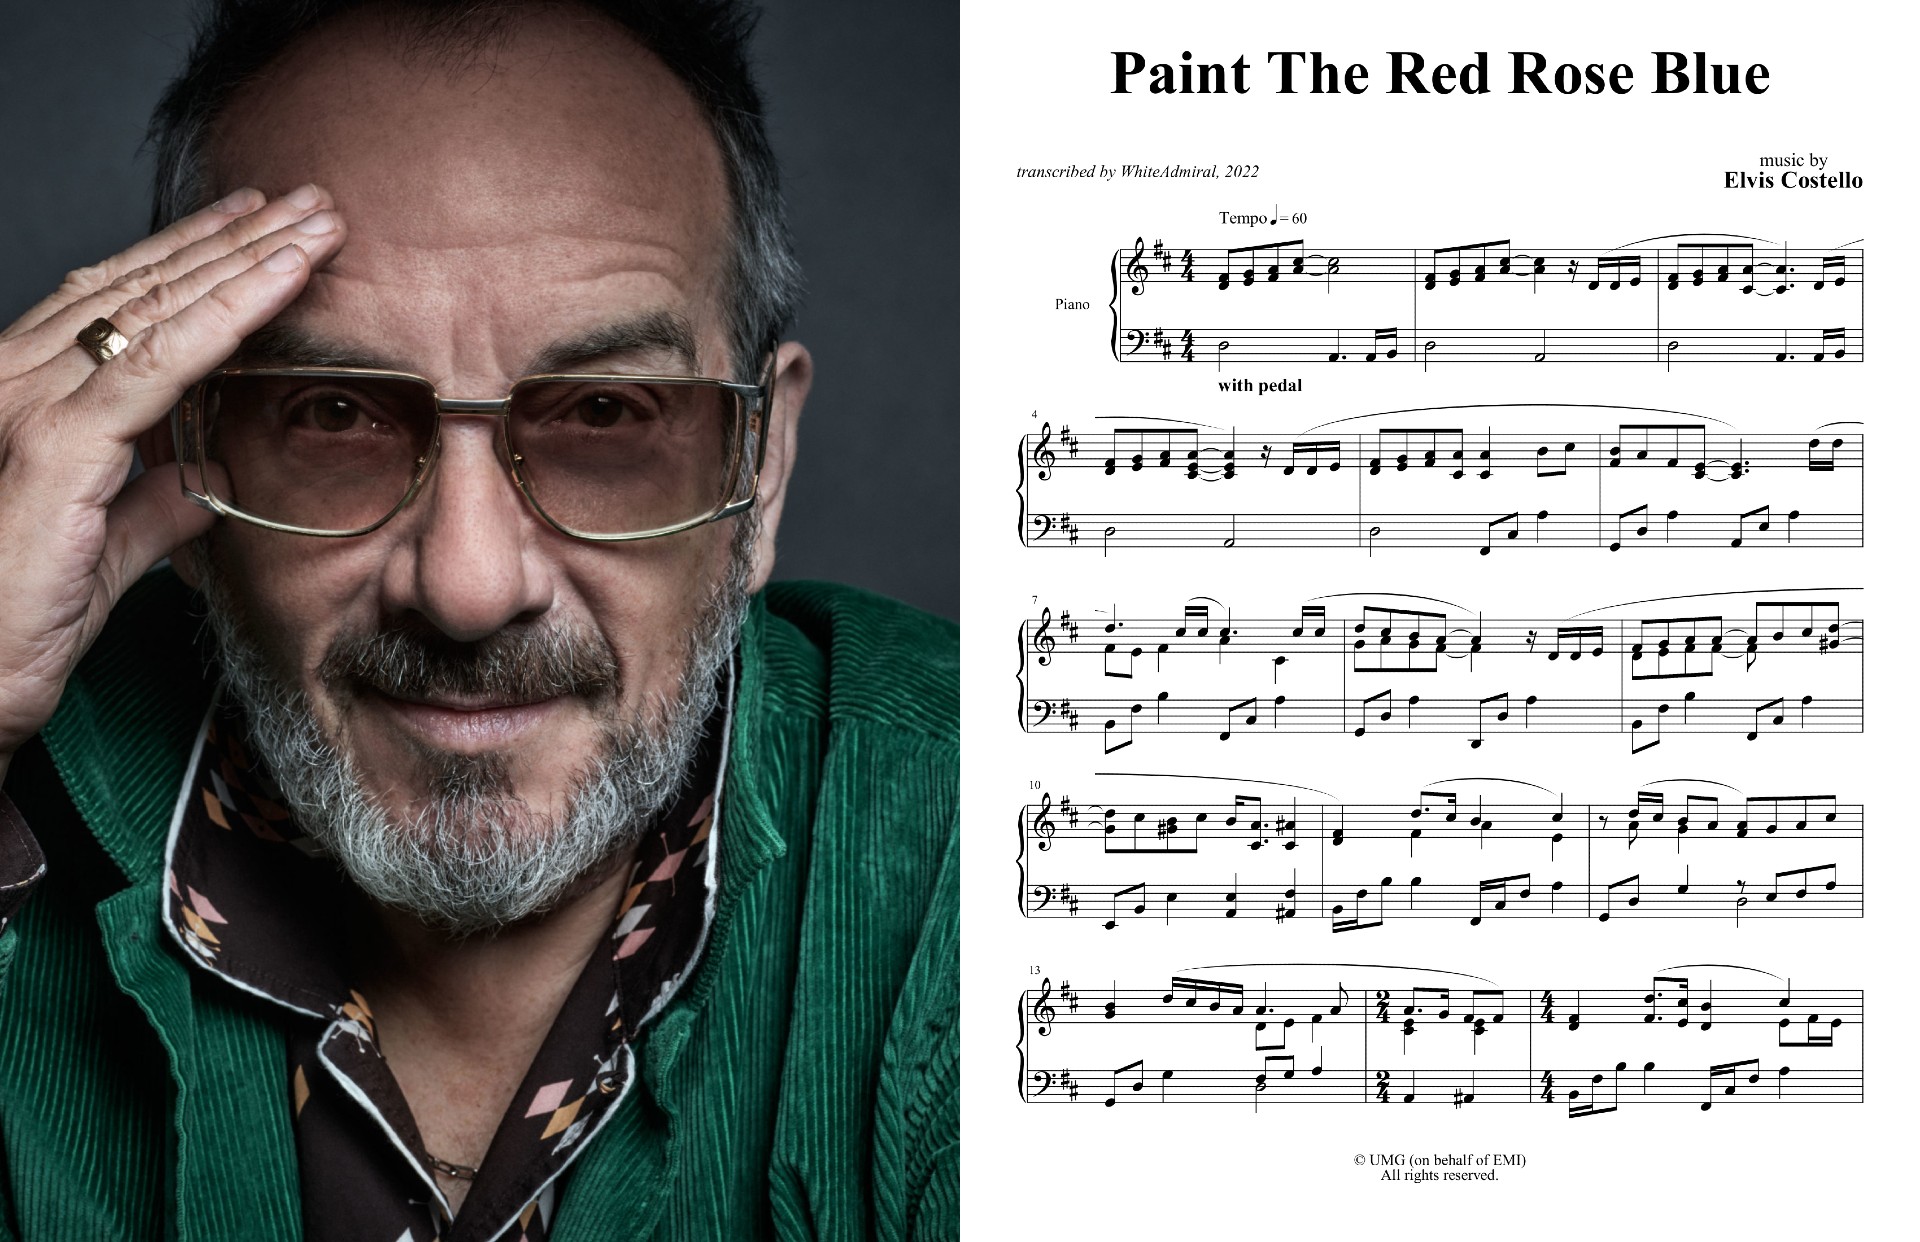 Paint The Red Rose Blue - Elvis Costello.jpg